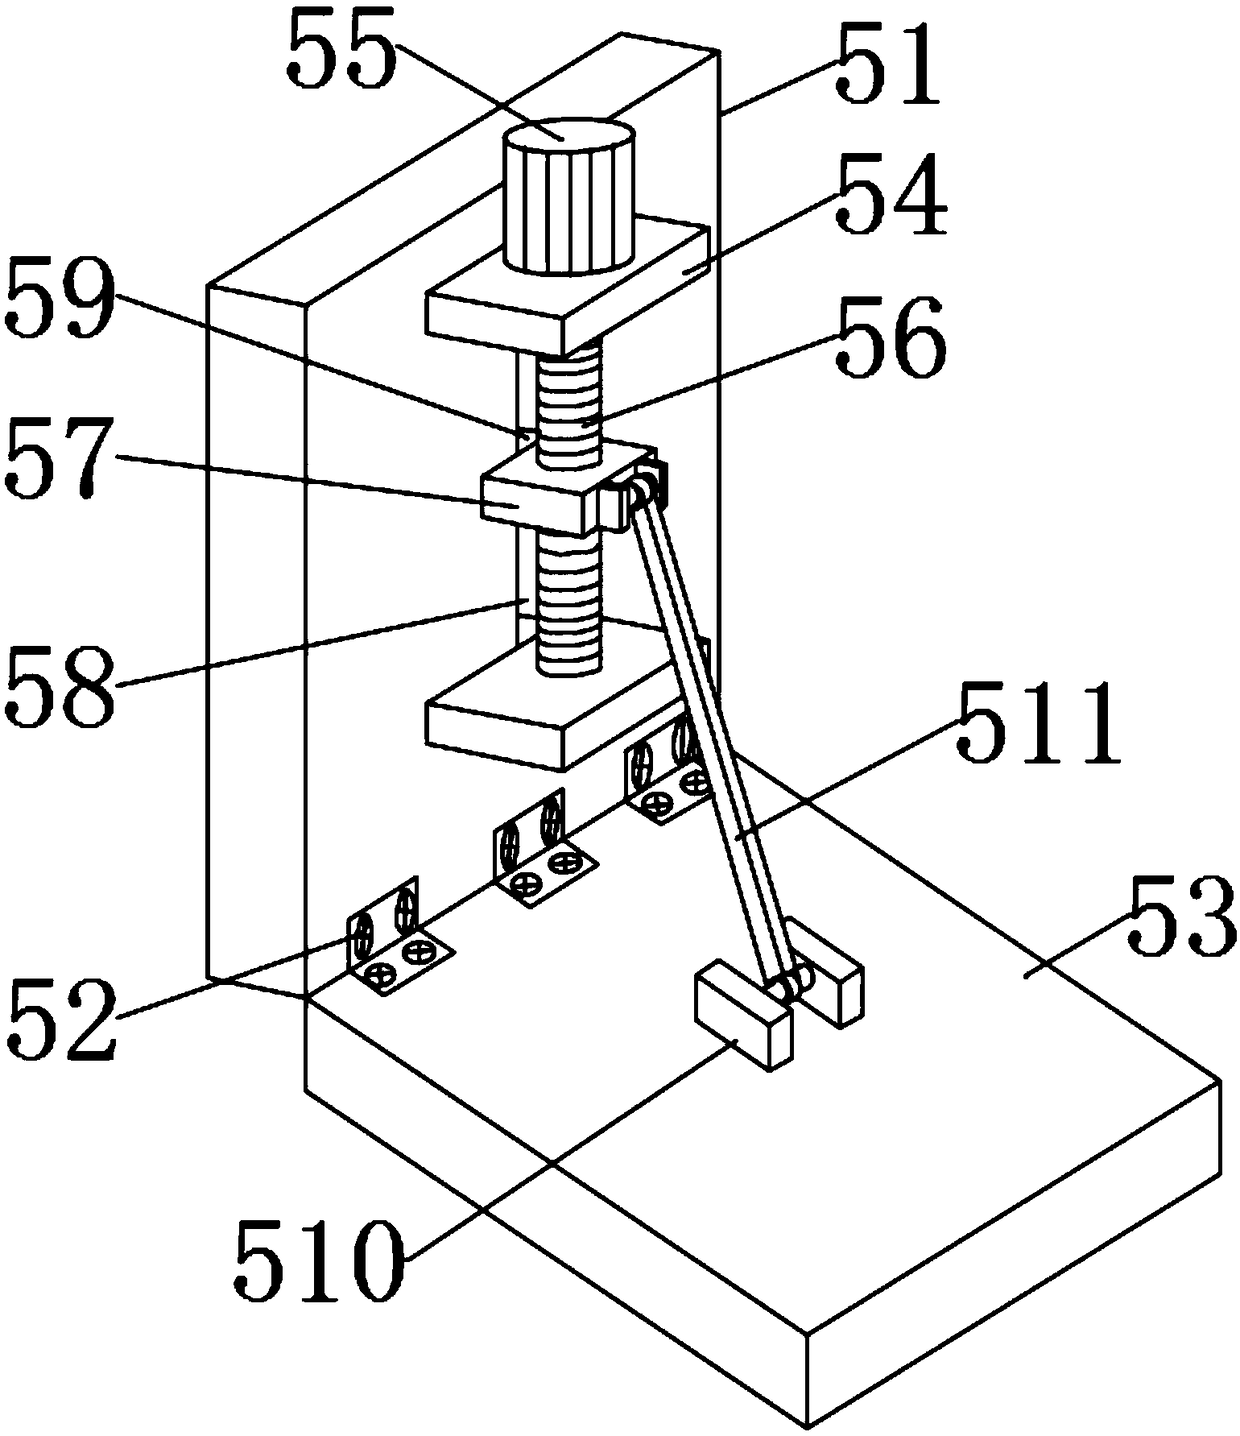 Extending arm adjusting structure of surgical microscope